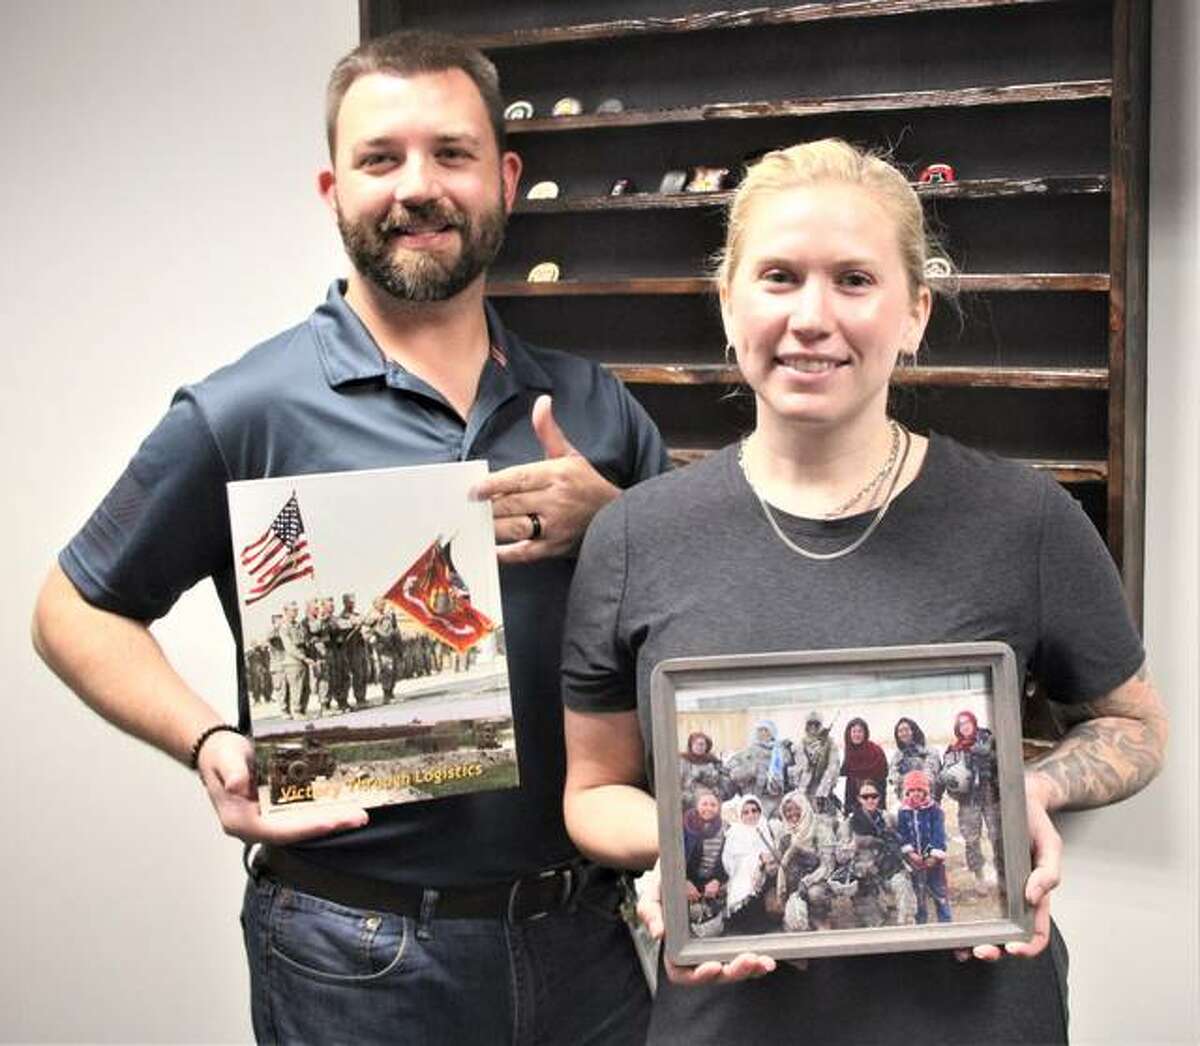 Bradley Yount, left, and Torie Ryan are veterans service officer benefit specialists with the Madison County Veterans Assistance Commission. Yount was a Marine satellite communications specialist and Ryan served as a medic with the 101st Airborne. Both are veterans of Afghanistan and talked about their experiences and feelings as the U.S. pulled out of the country last week.